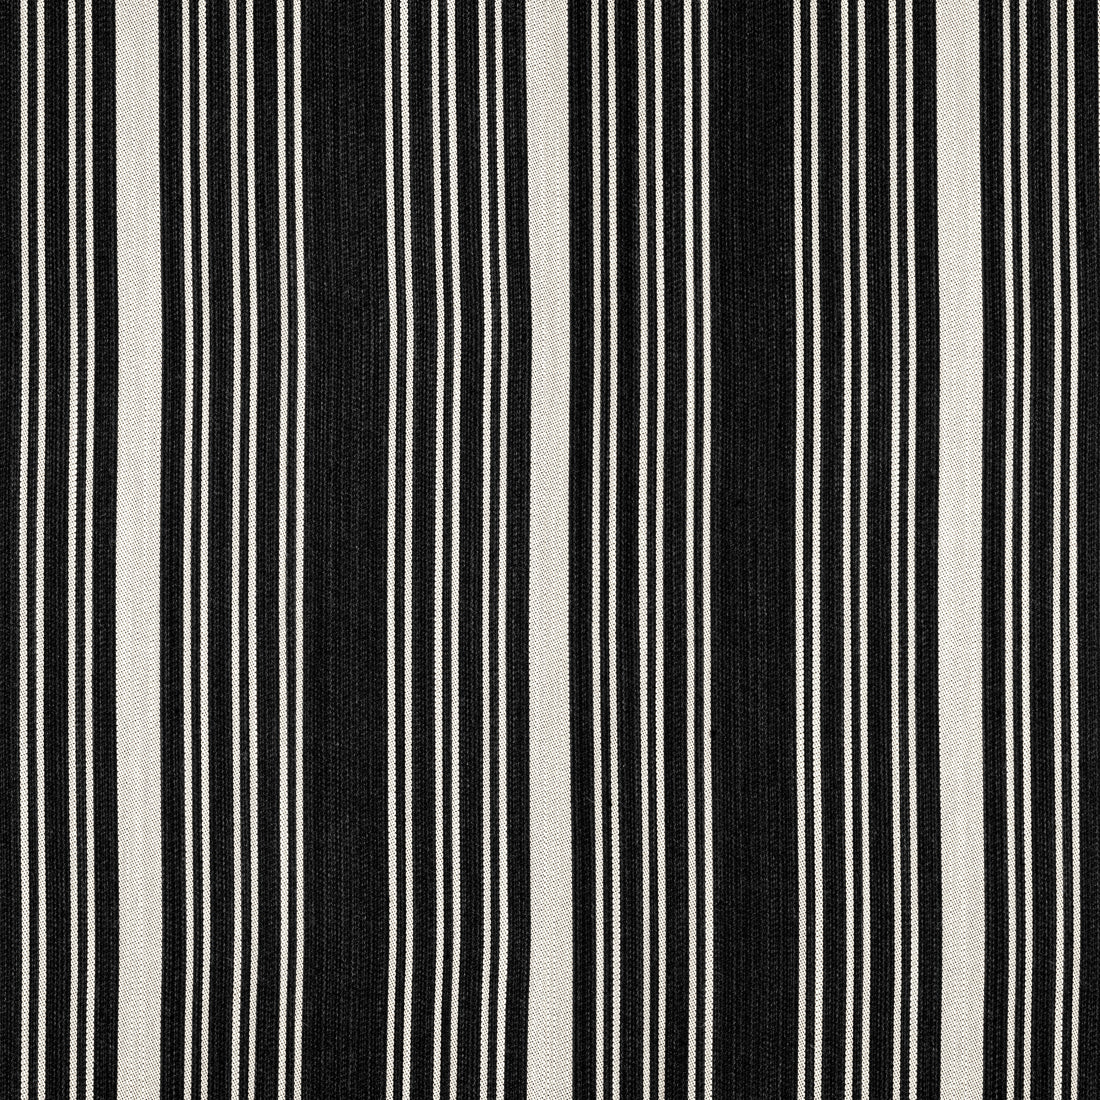 Kaia Stripe fabric in onyx color - pattern number W8537 - by Thibaut in the Villa collection